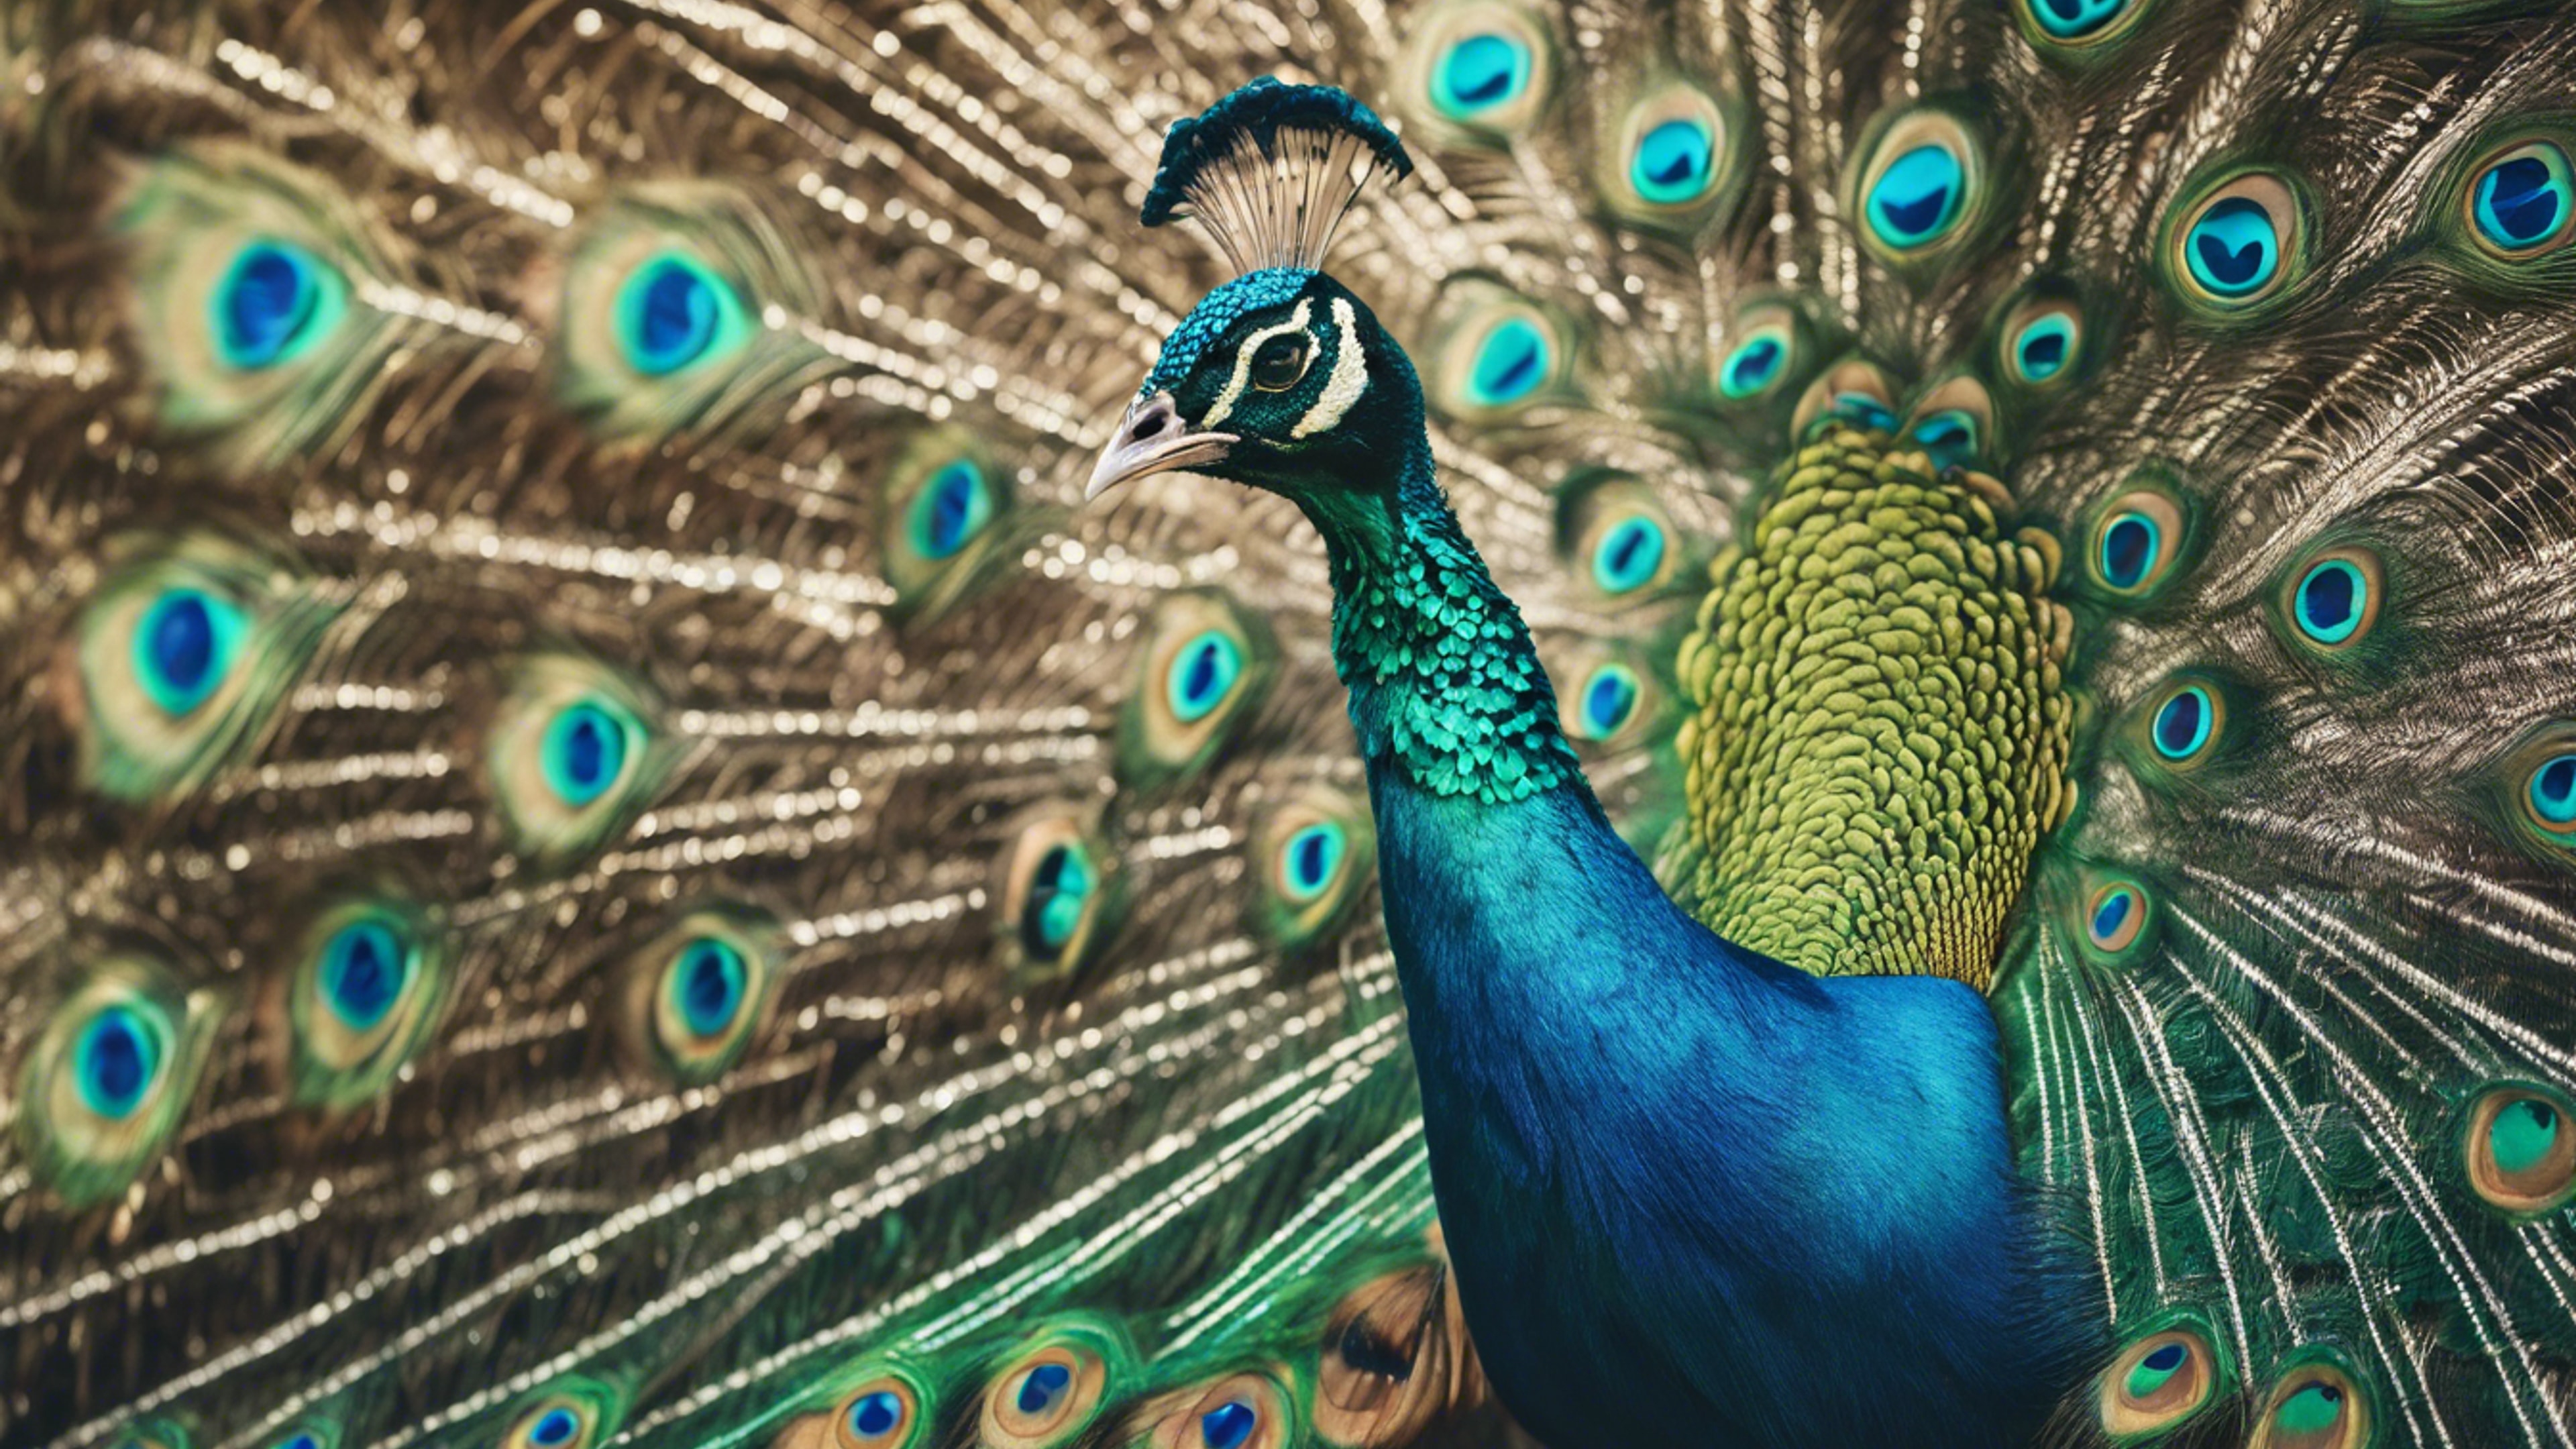 A proudly standing peacock showing off its cool teal plumage. Hintergrund[c03cd8acf17648f0a47e]